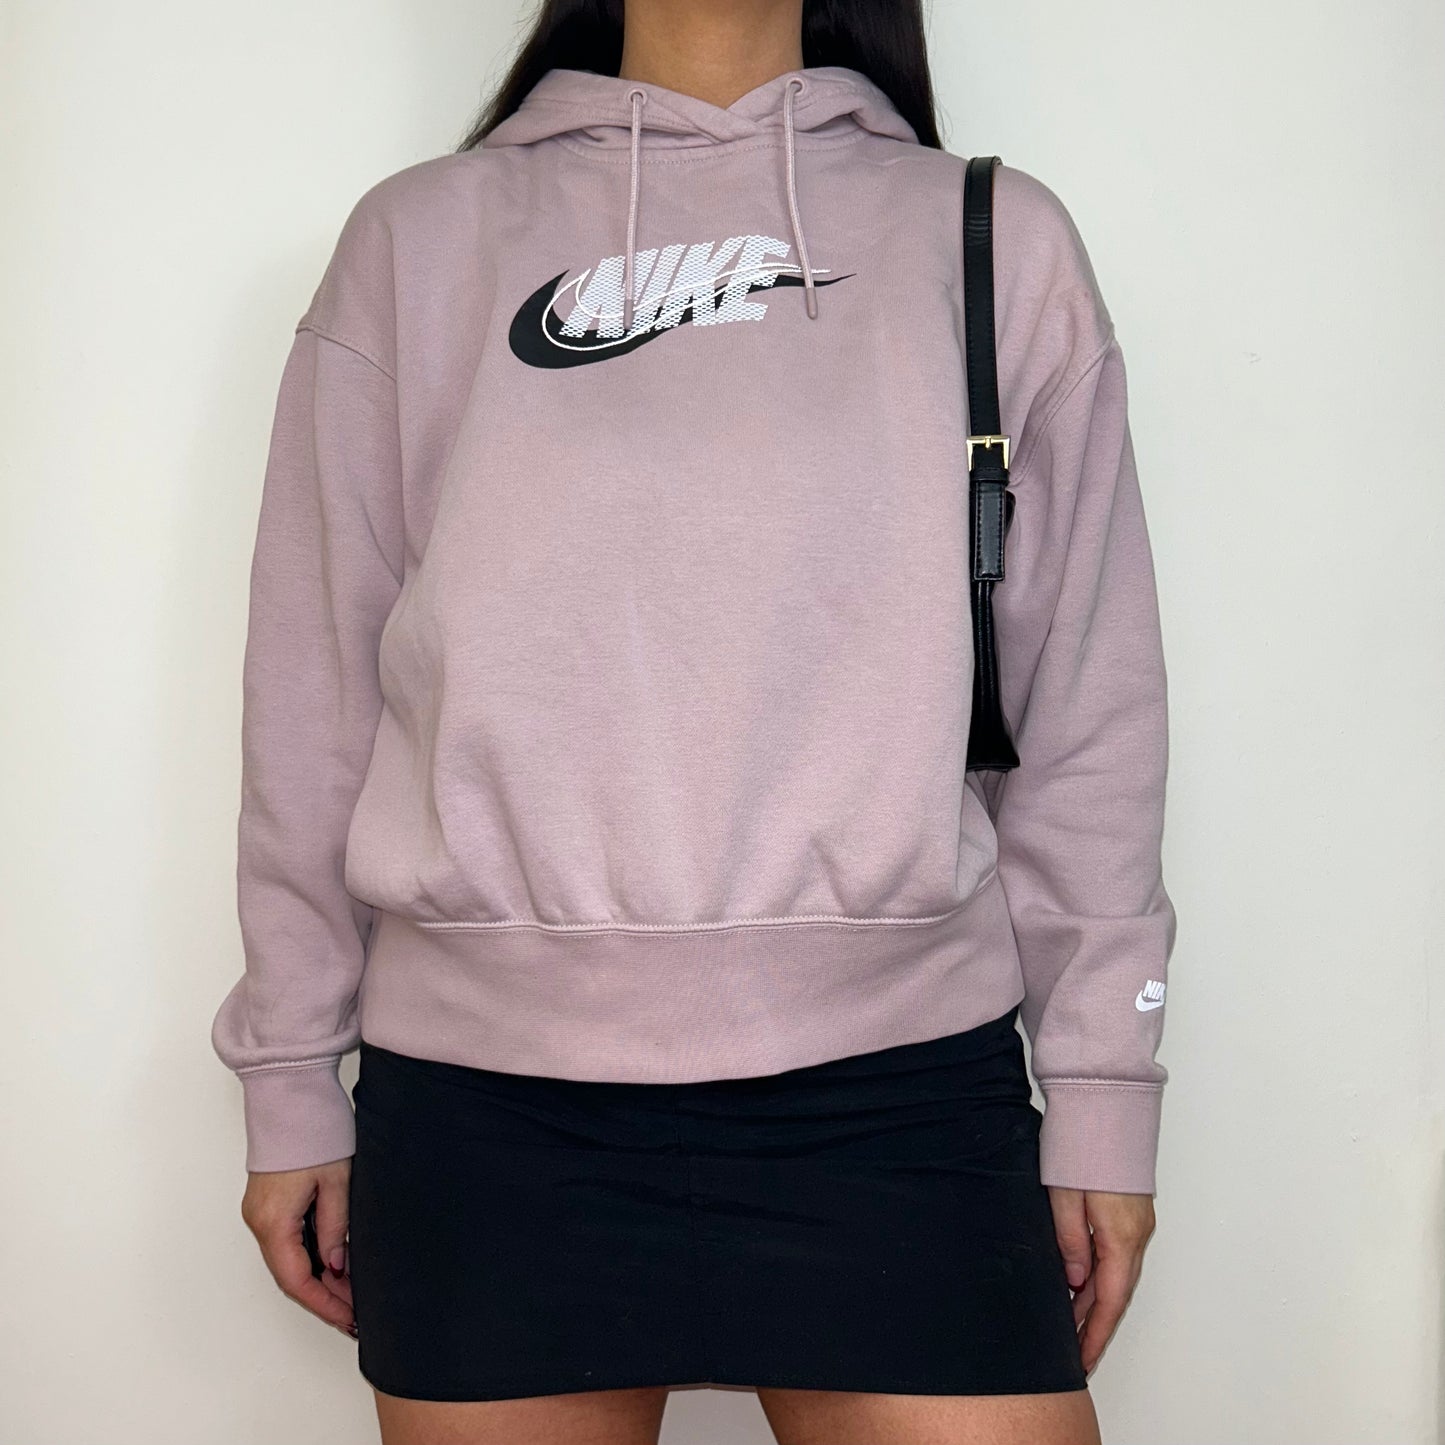 pink hoodie with white and black nike logo shown on a model wearing a black mini skirt and black shoulder bag